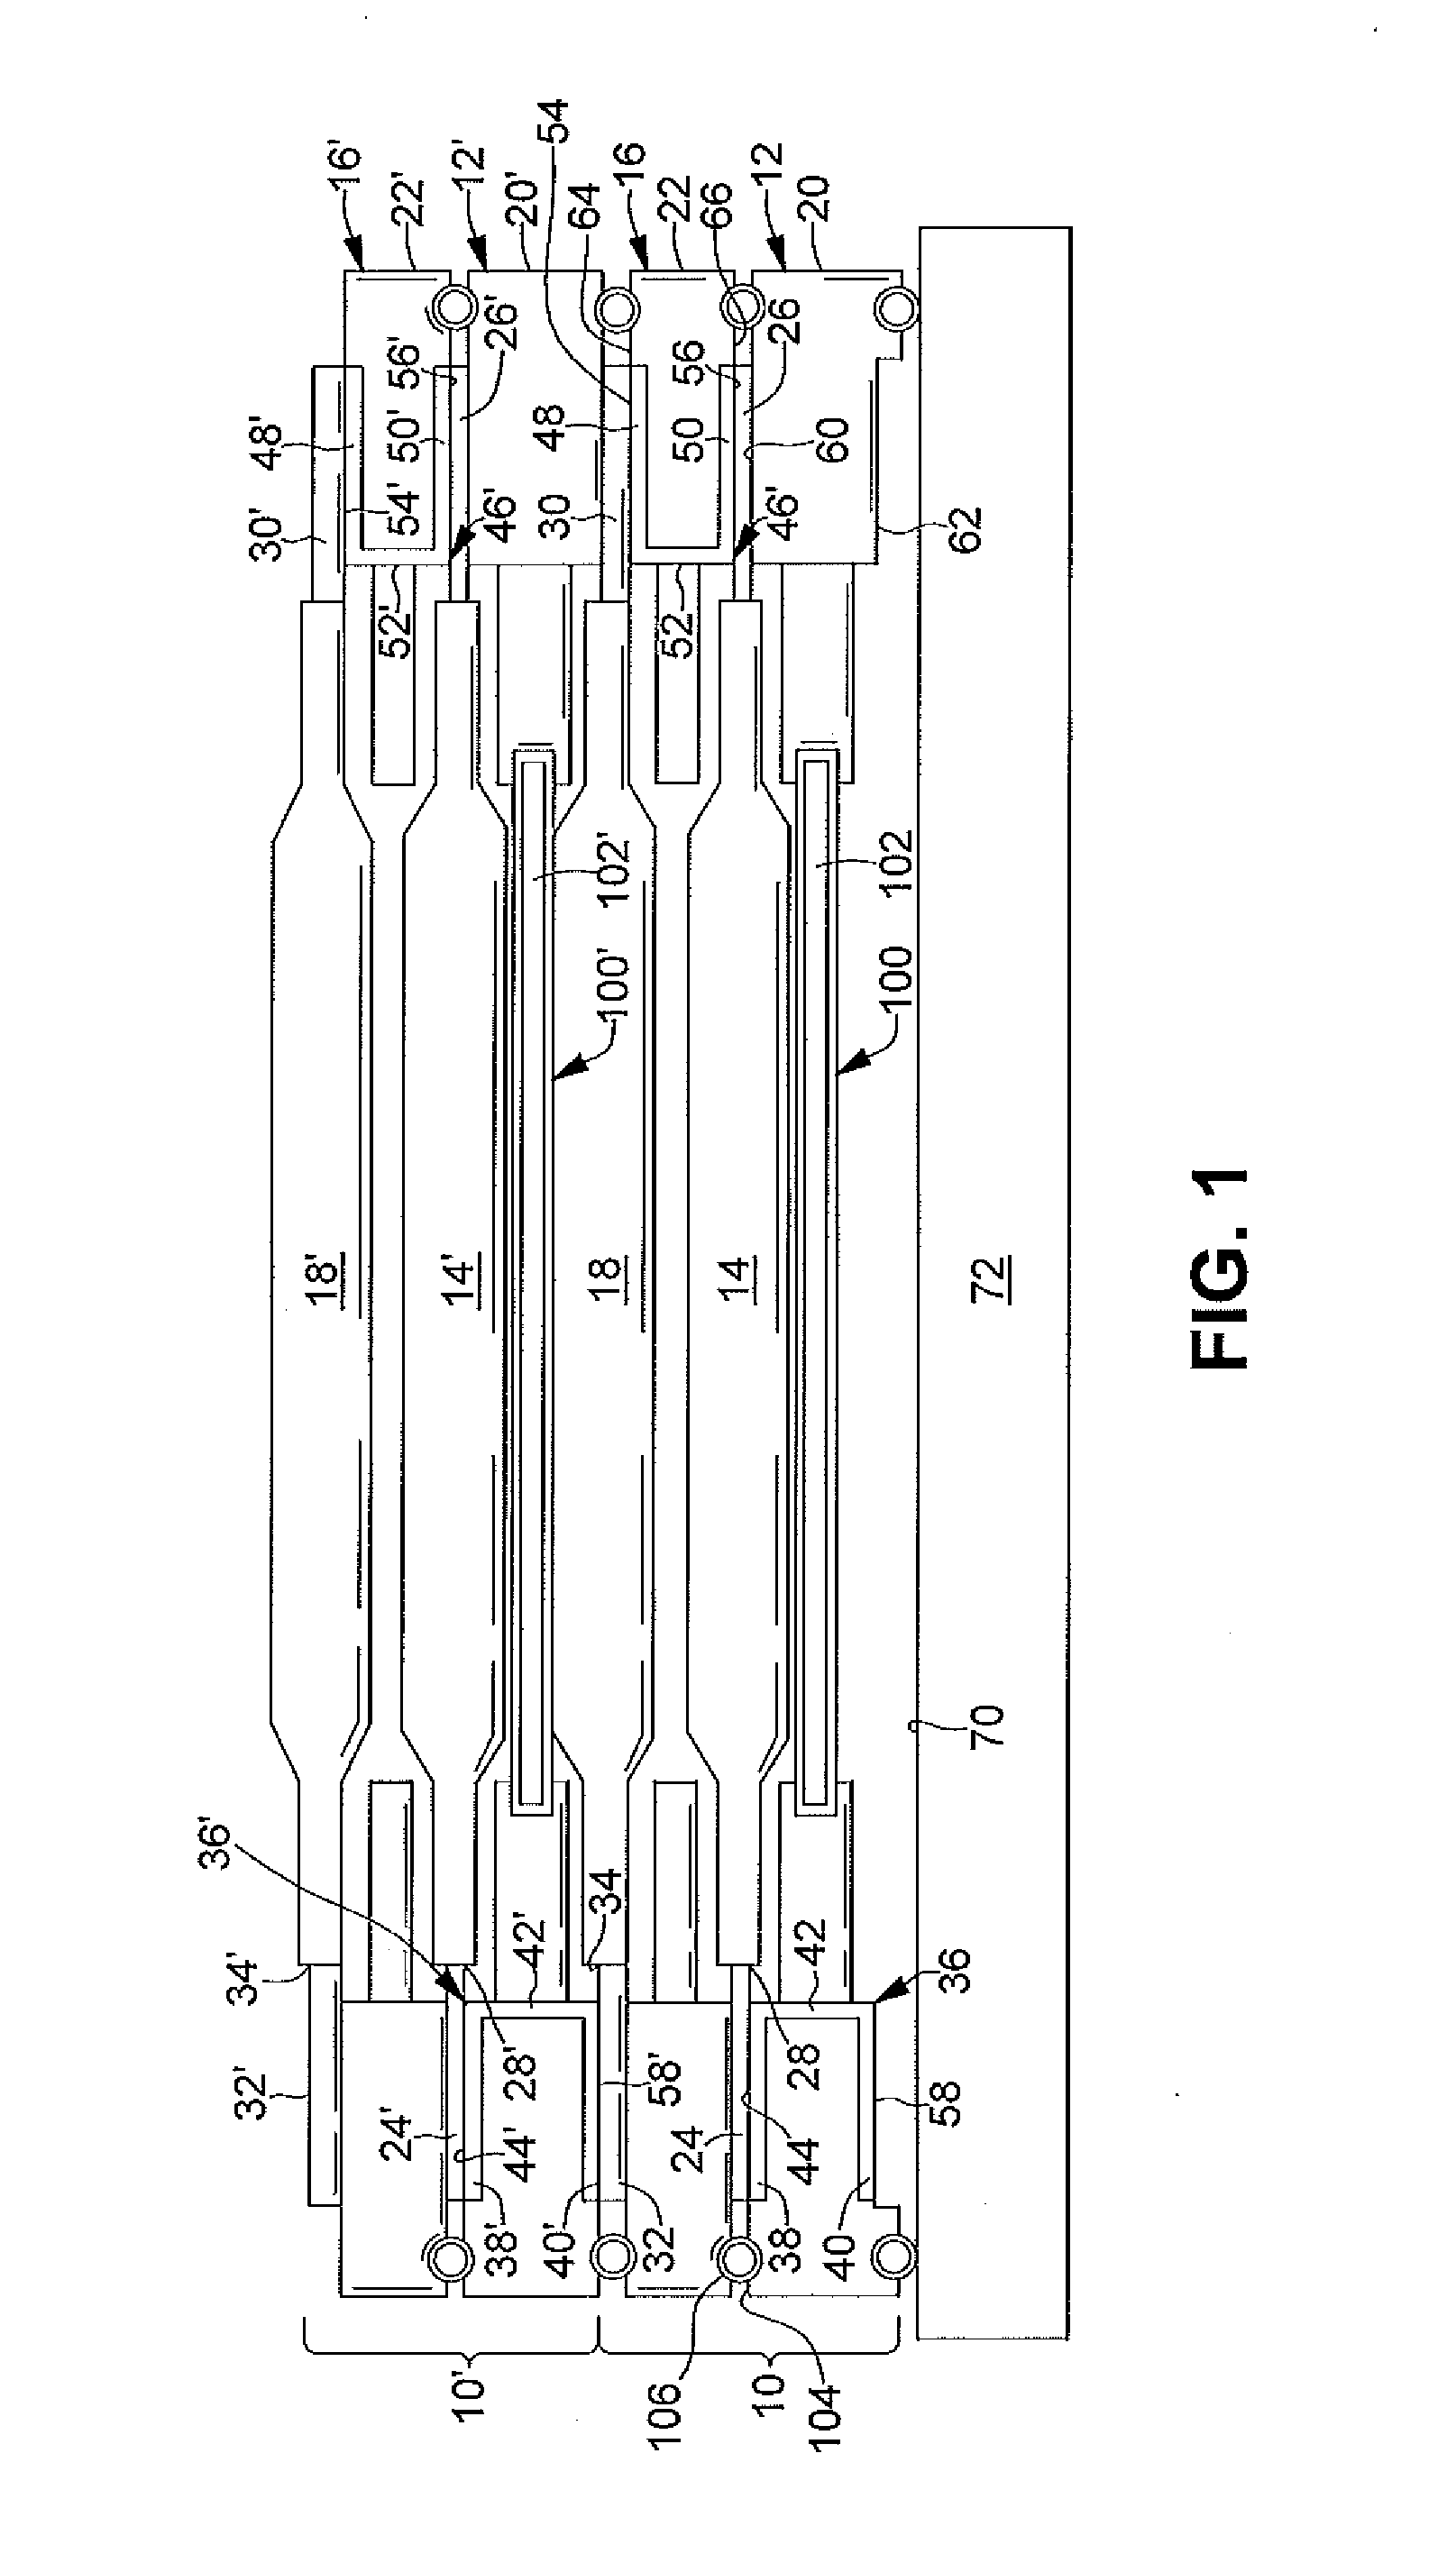 Repeating frame battery with compression joining of cell tabs to welded connection terminals